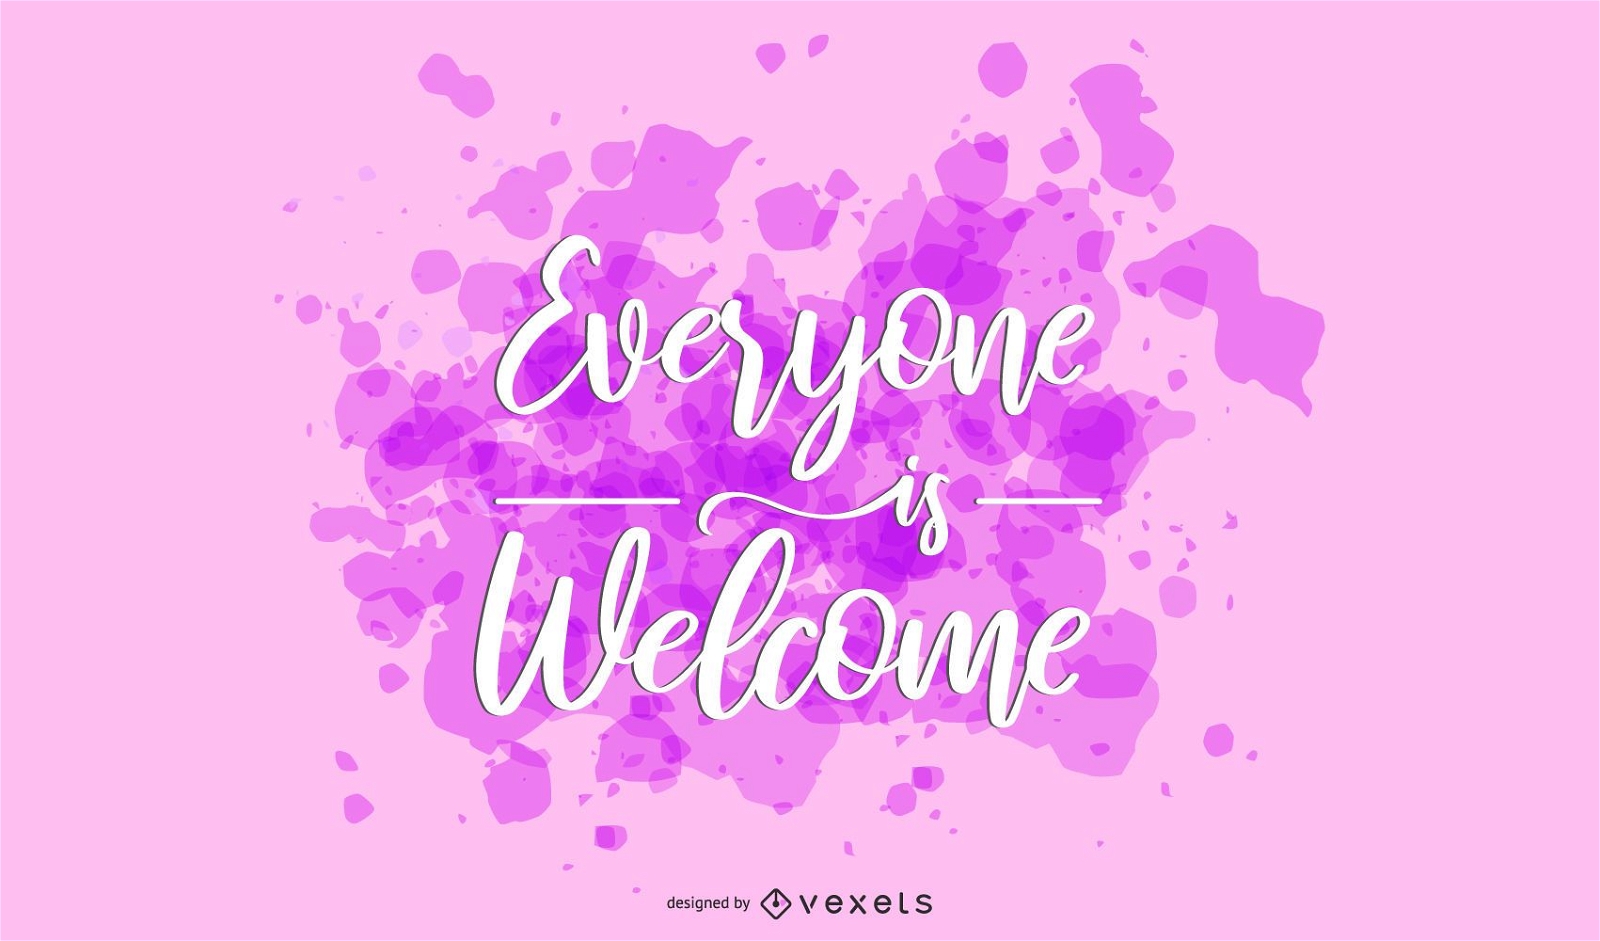 Everyone is Welcome Lettering Design